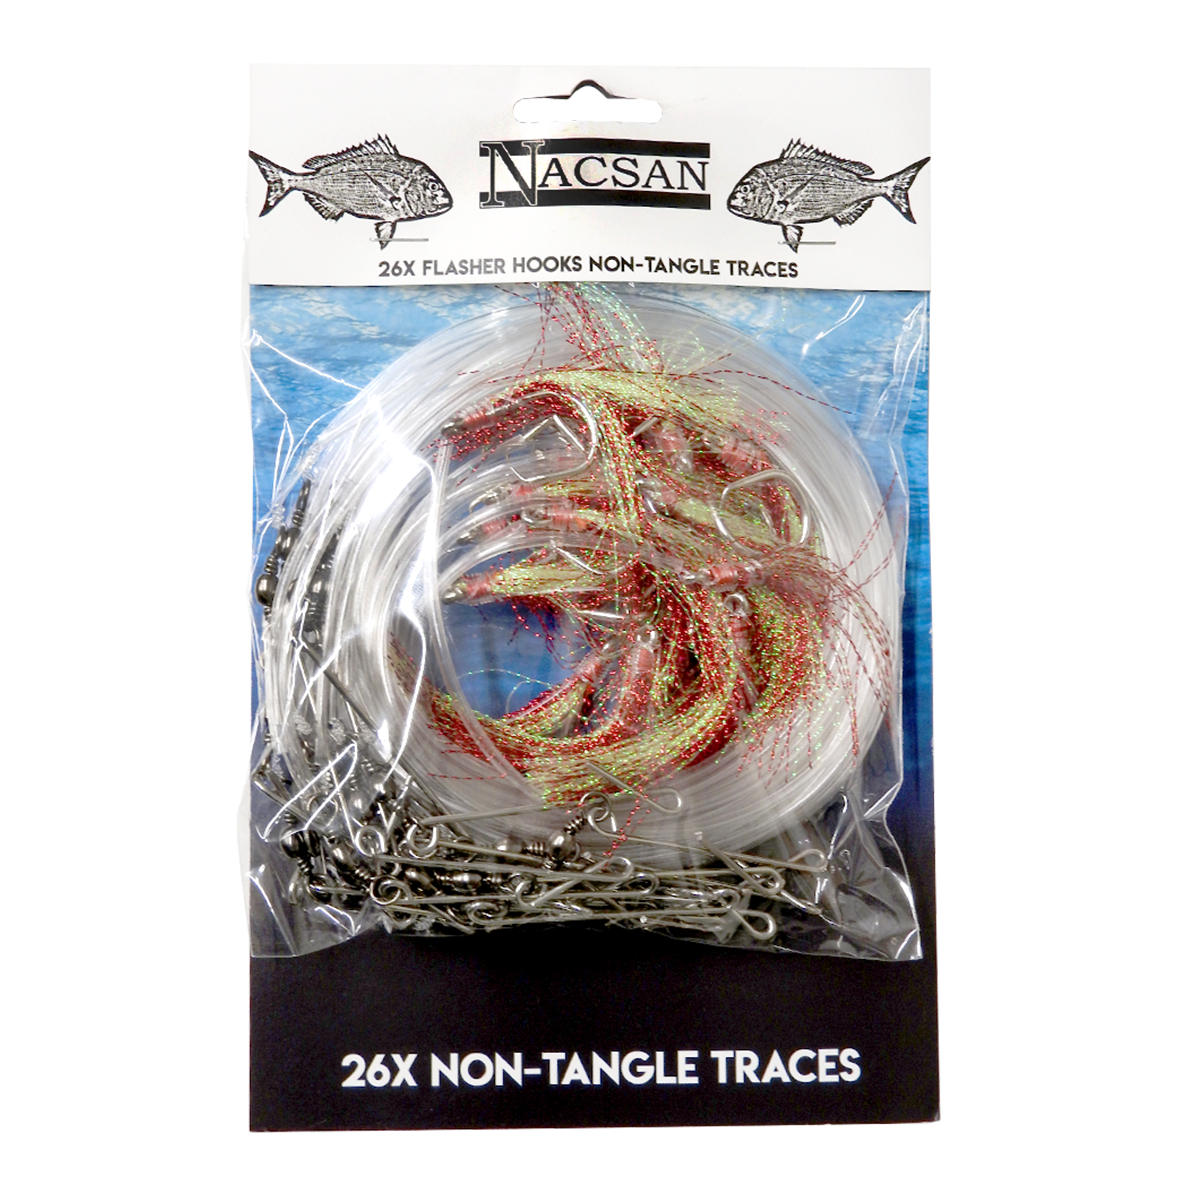 Tangle Free Longline Trace Set With Flasher Rig Hooks (26 Pack)